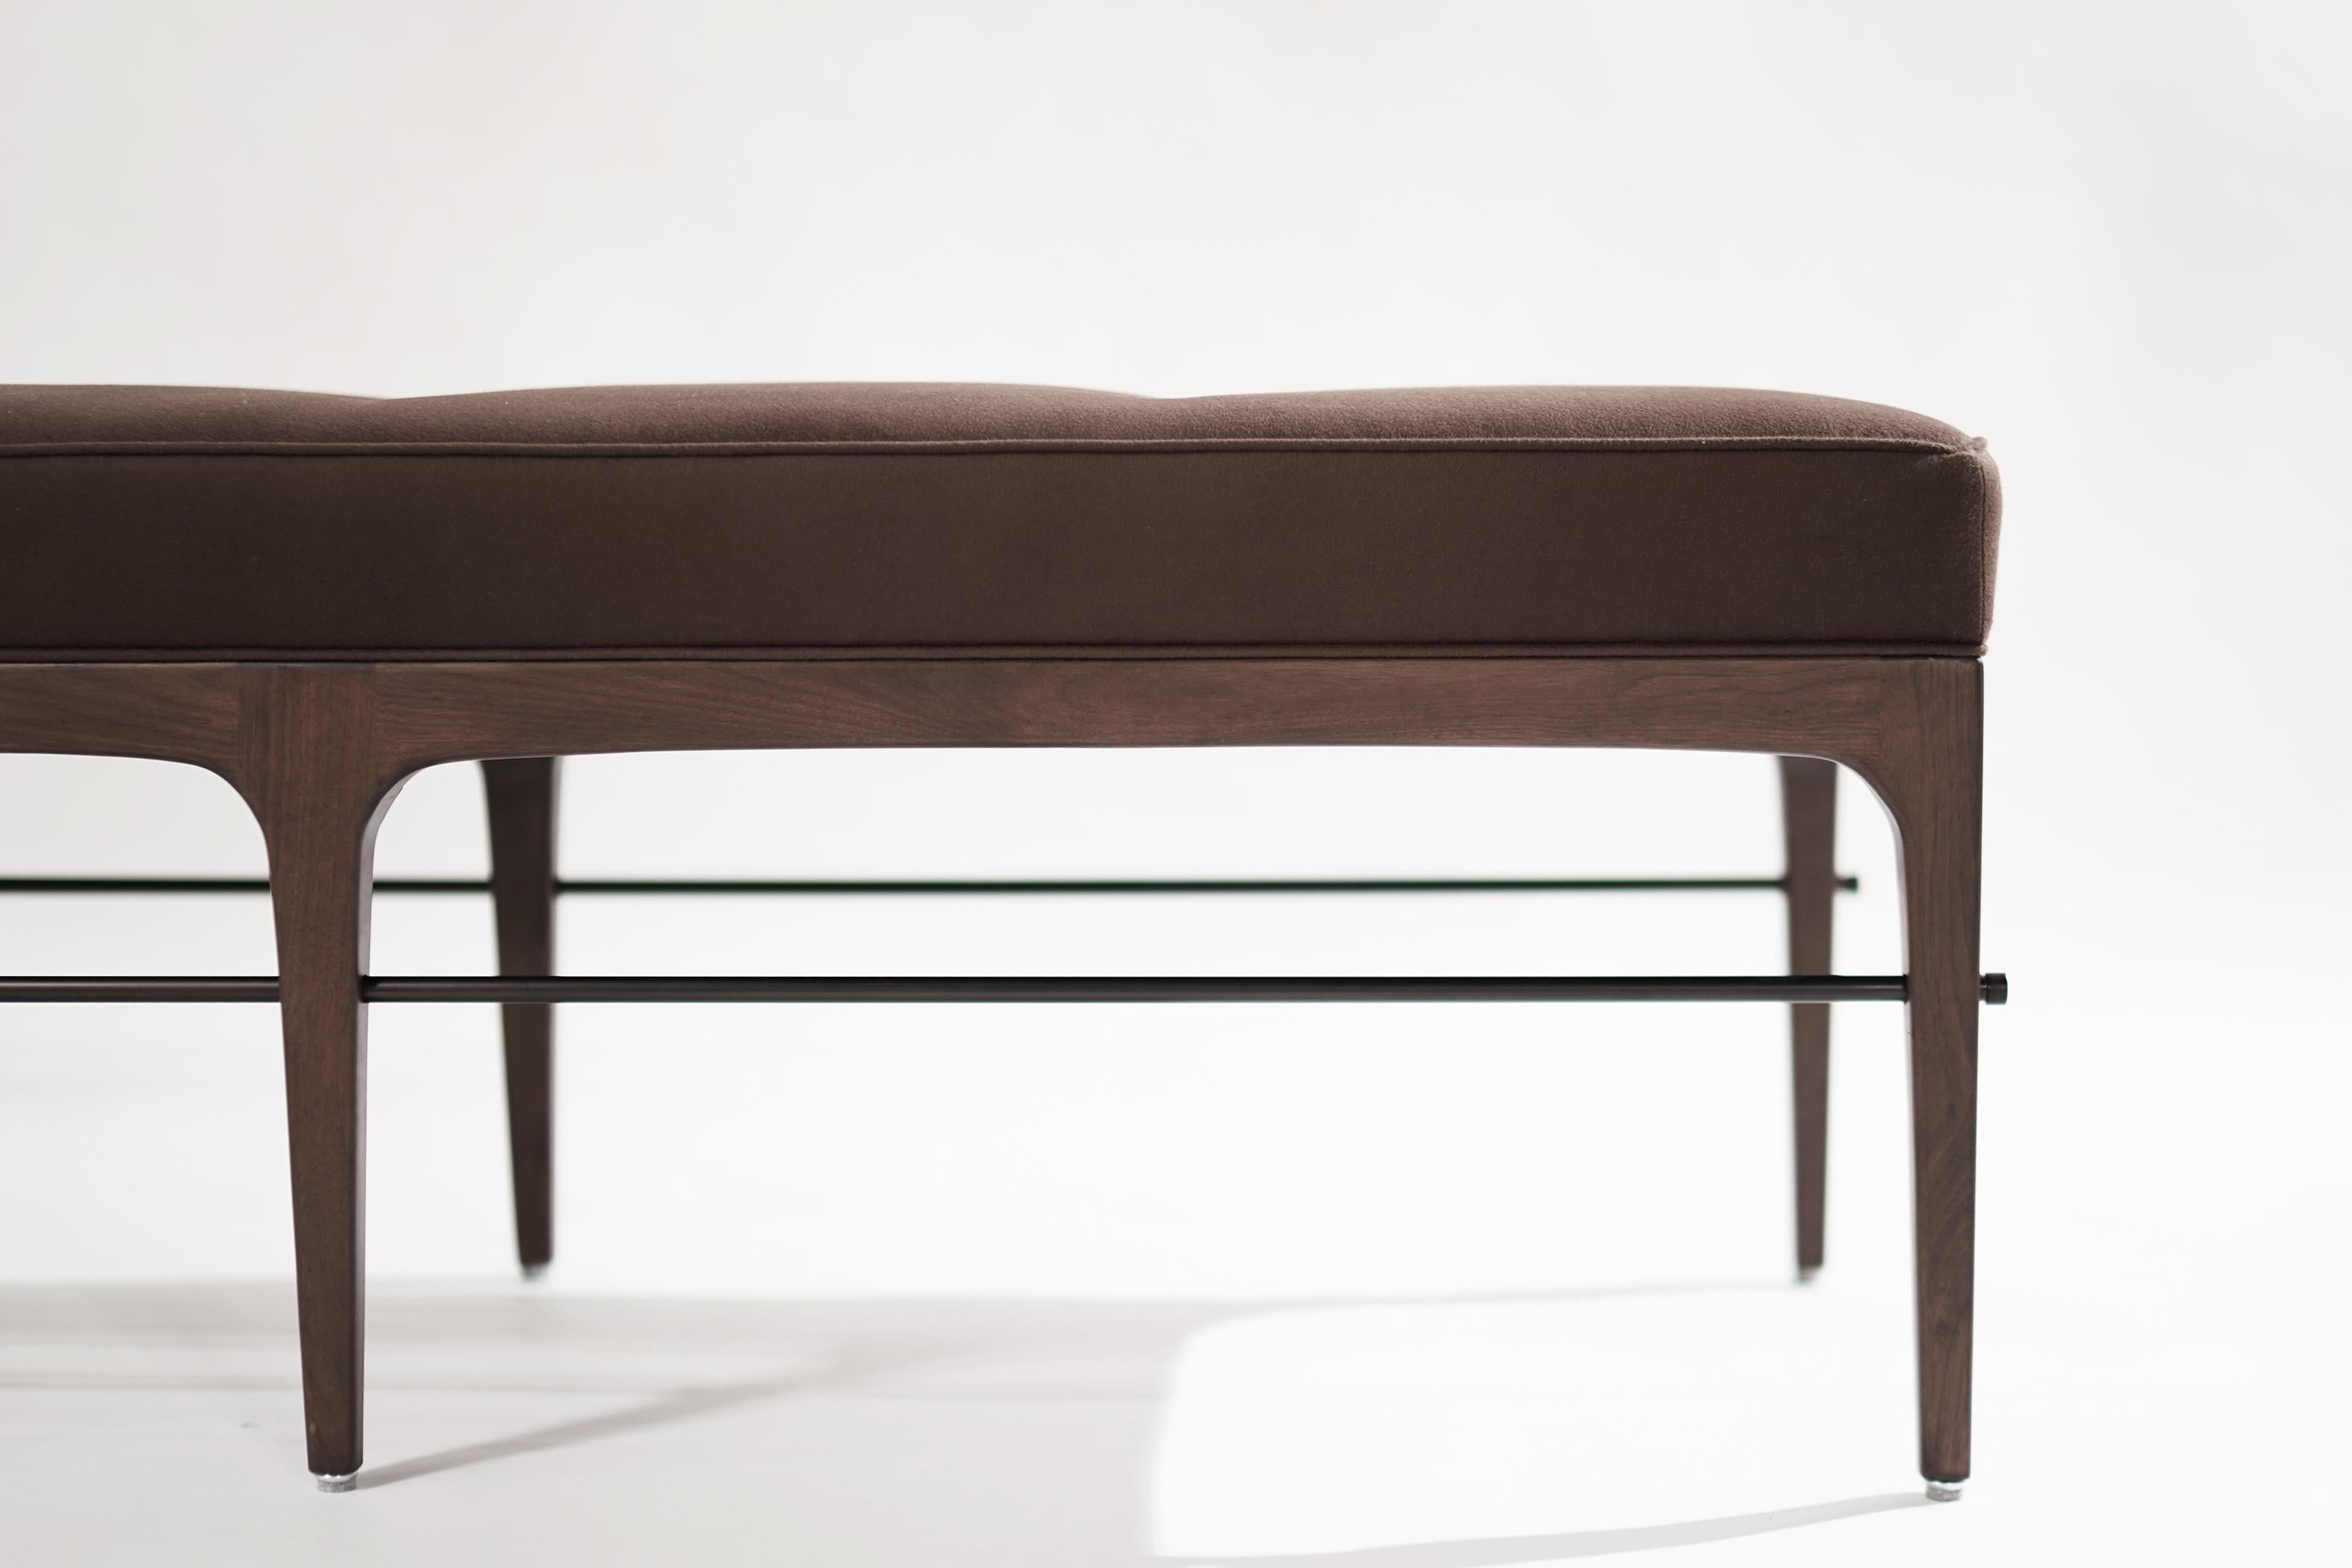 Linear Bench in Dark Wanut Series 60 by Stamford Modern In New Condition For Sale In Westport, CT